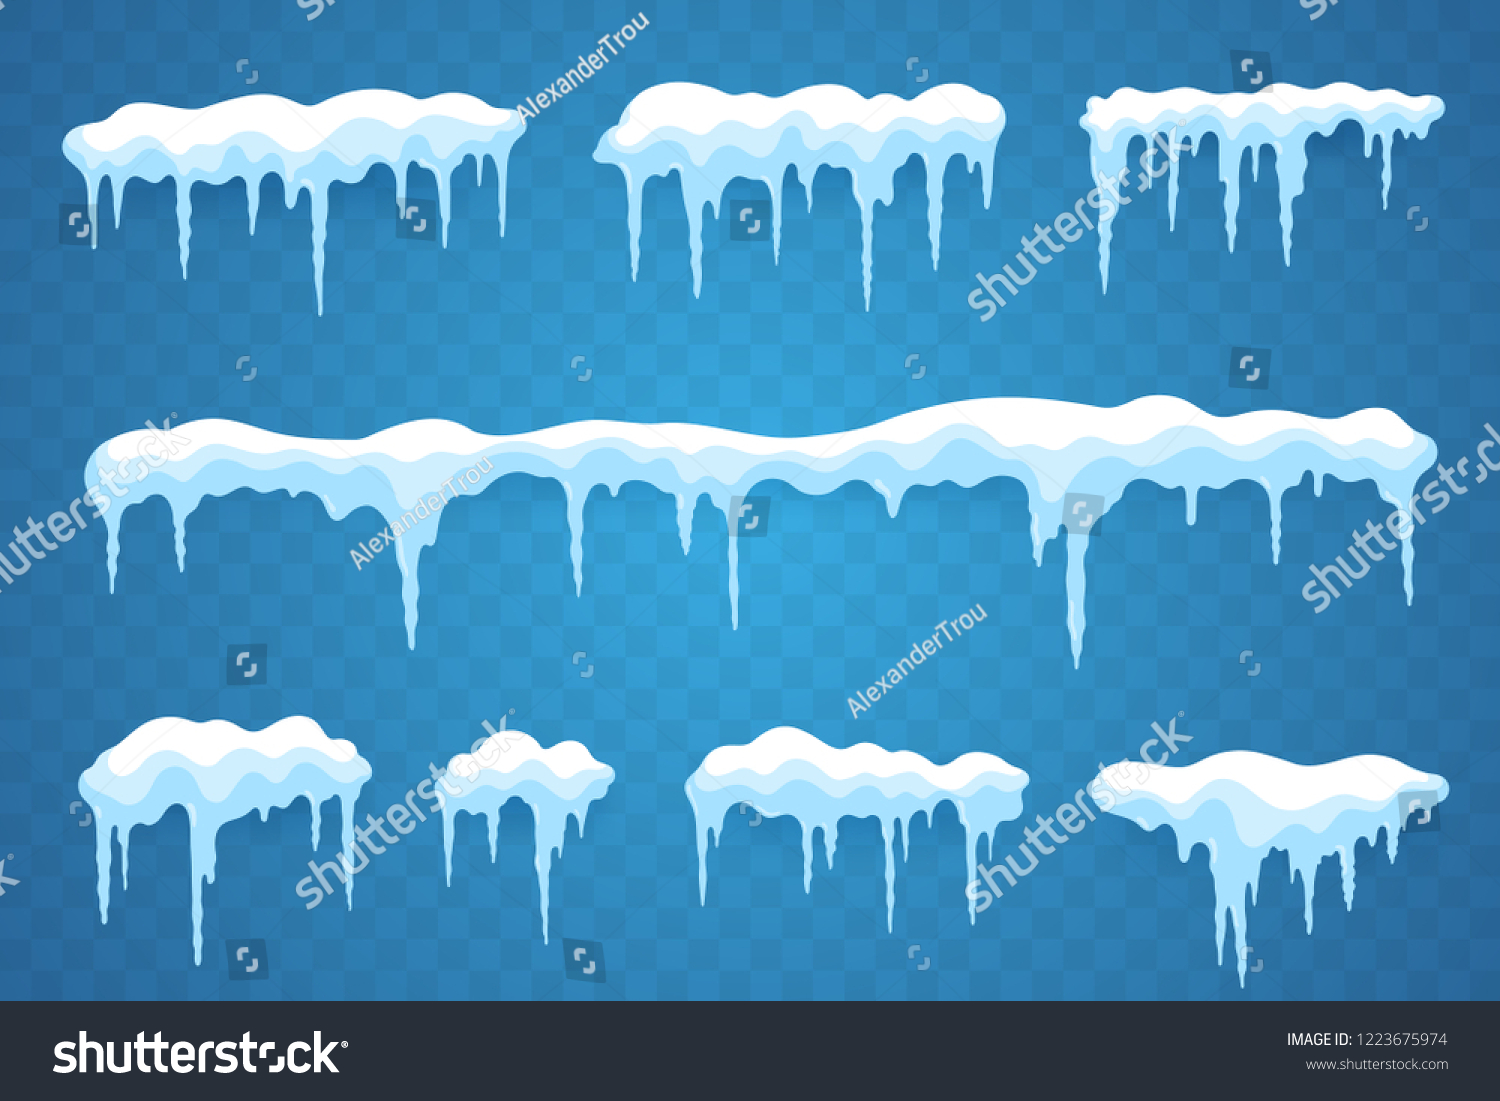 Snow icicles set isolated on transparent background. Snowcap borders. Vector snowy elements. Hanging icicles in flat style. Decoration for winter design. #1223675974